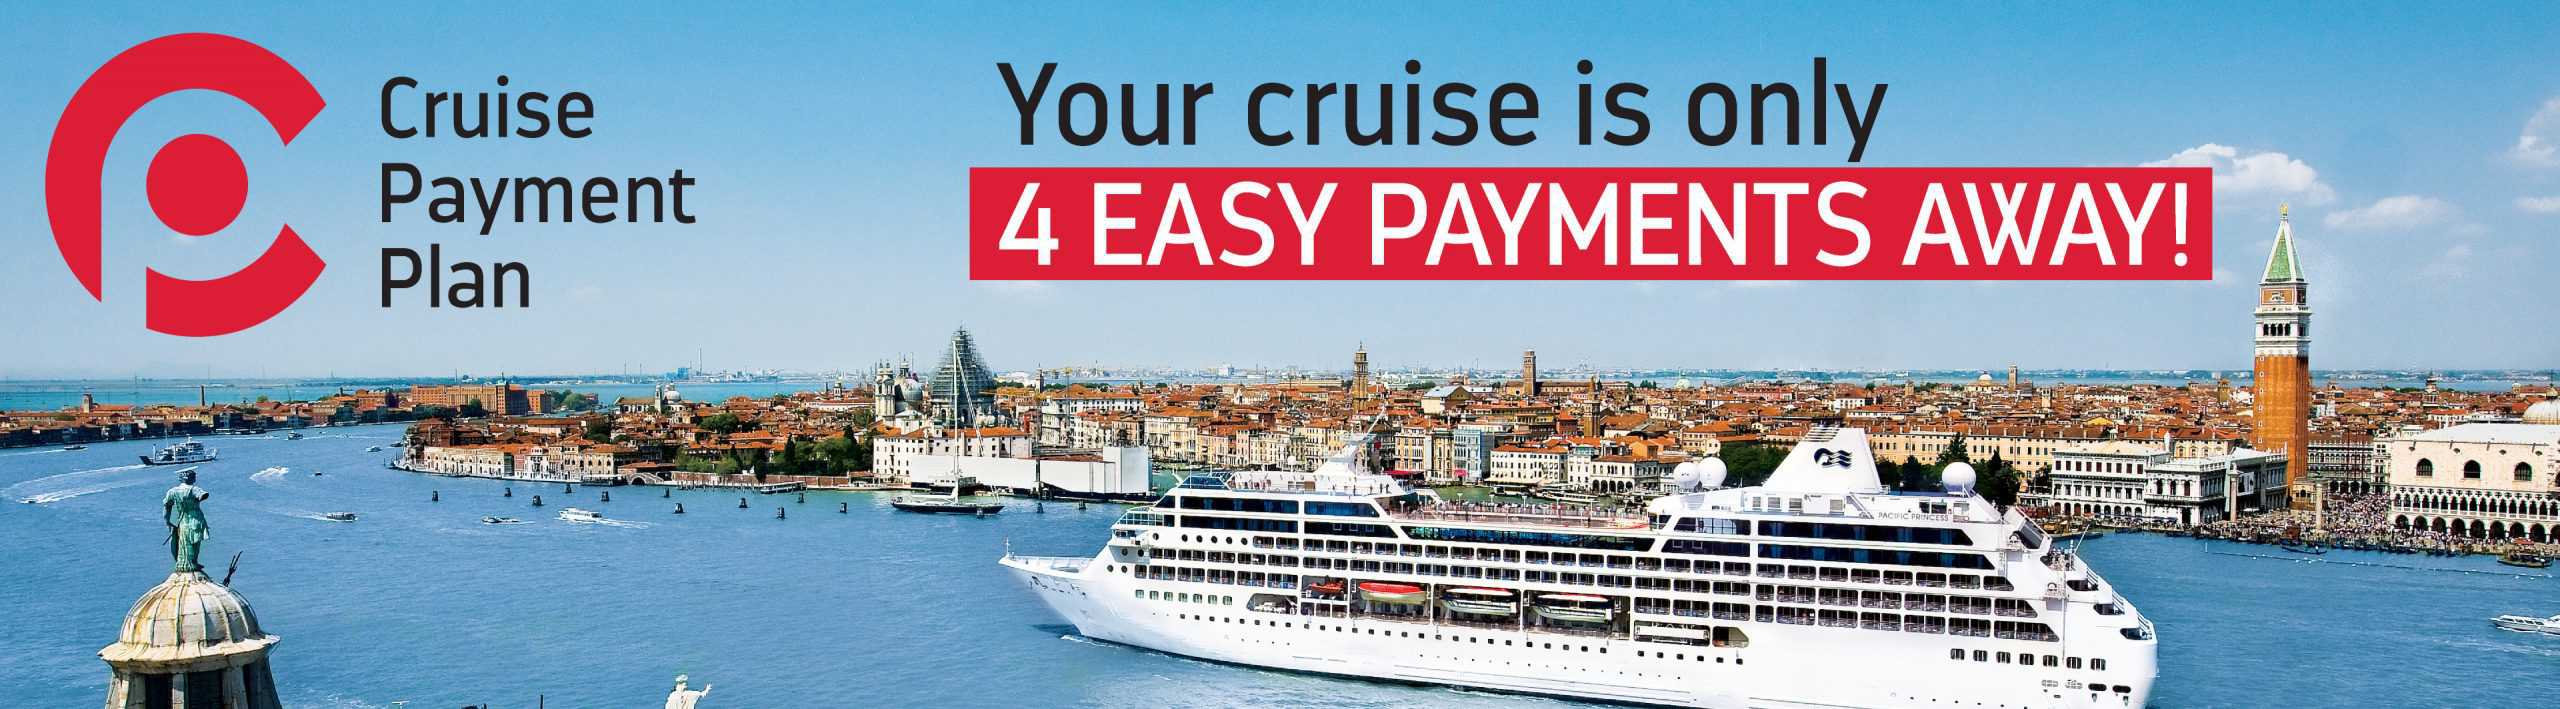 Cruise Payment Plan - 4 Easy Payments | Cruise Guru